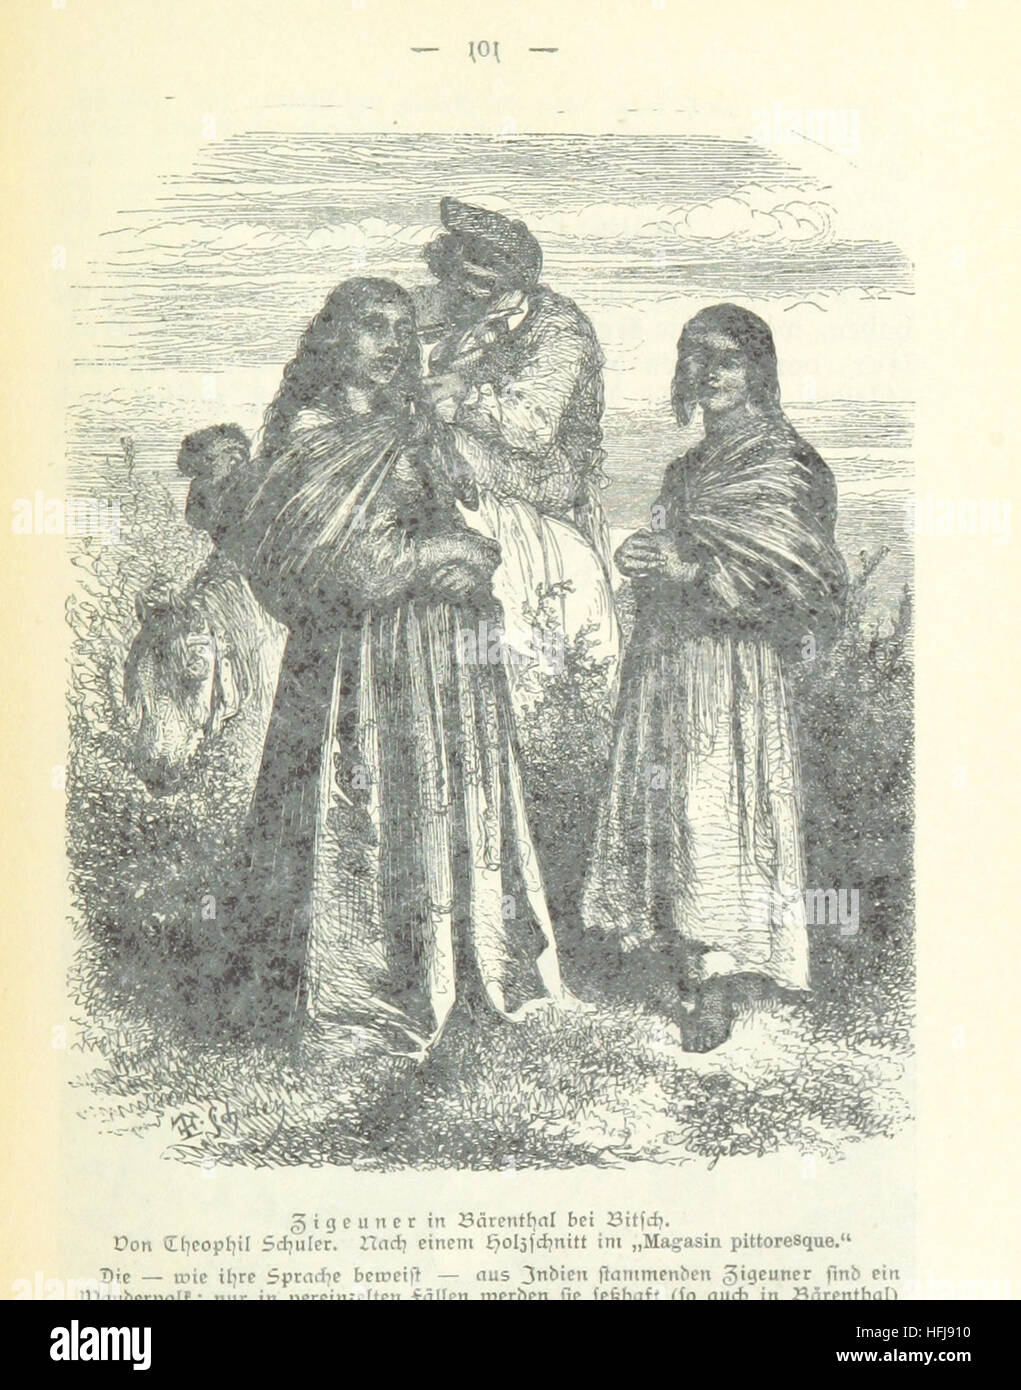 Image taken from page 109 of 'Elsass-Lothringen' Image taken from page 109 of 'Elsass-Lothringen' Stock Photo